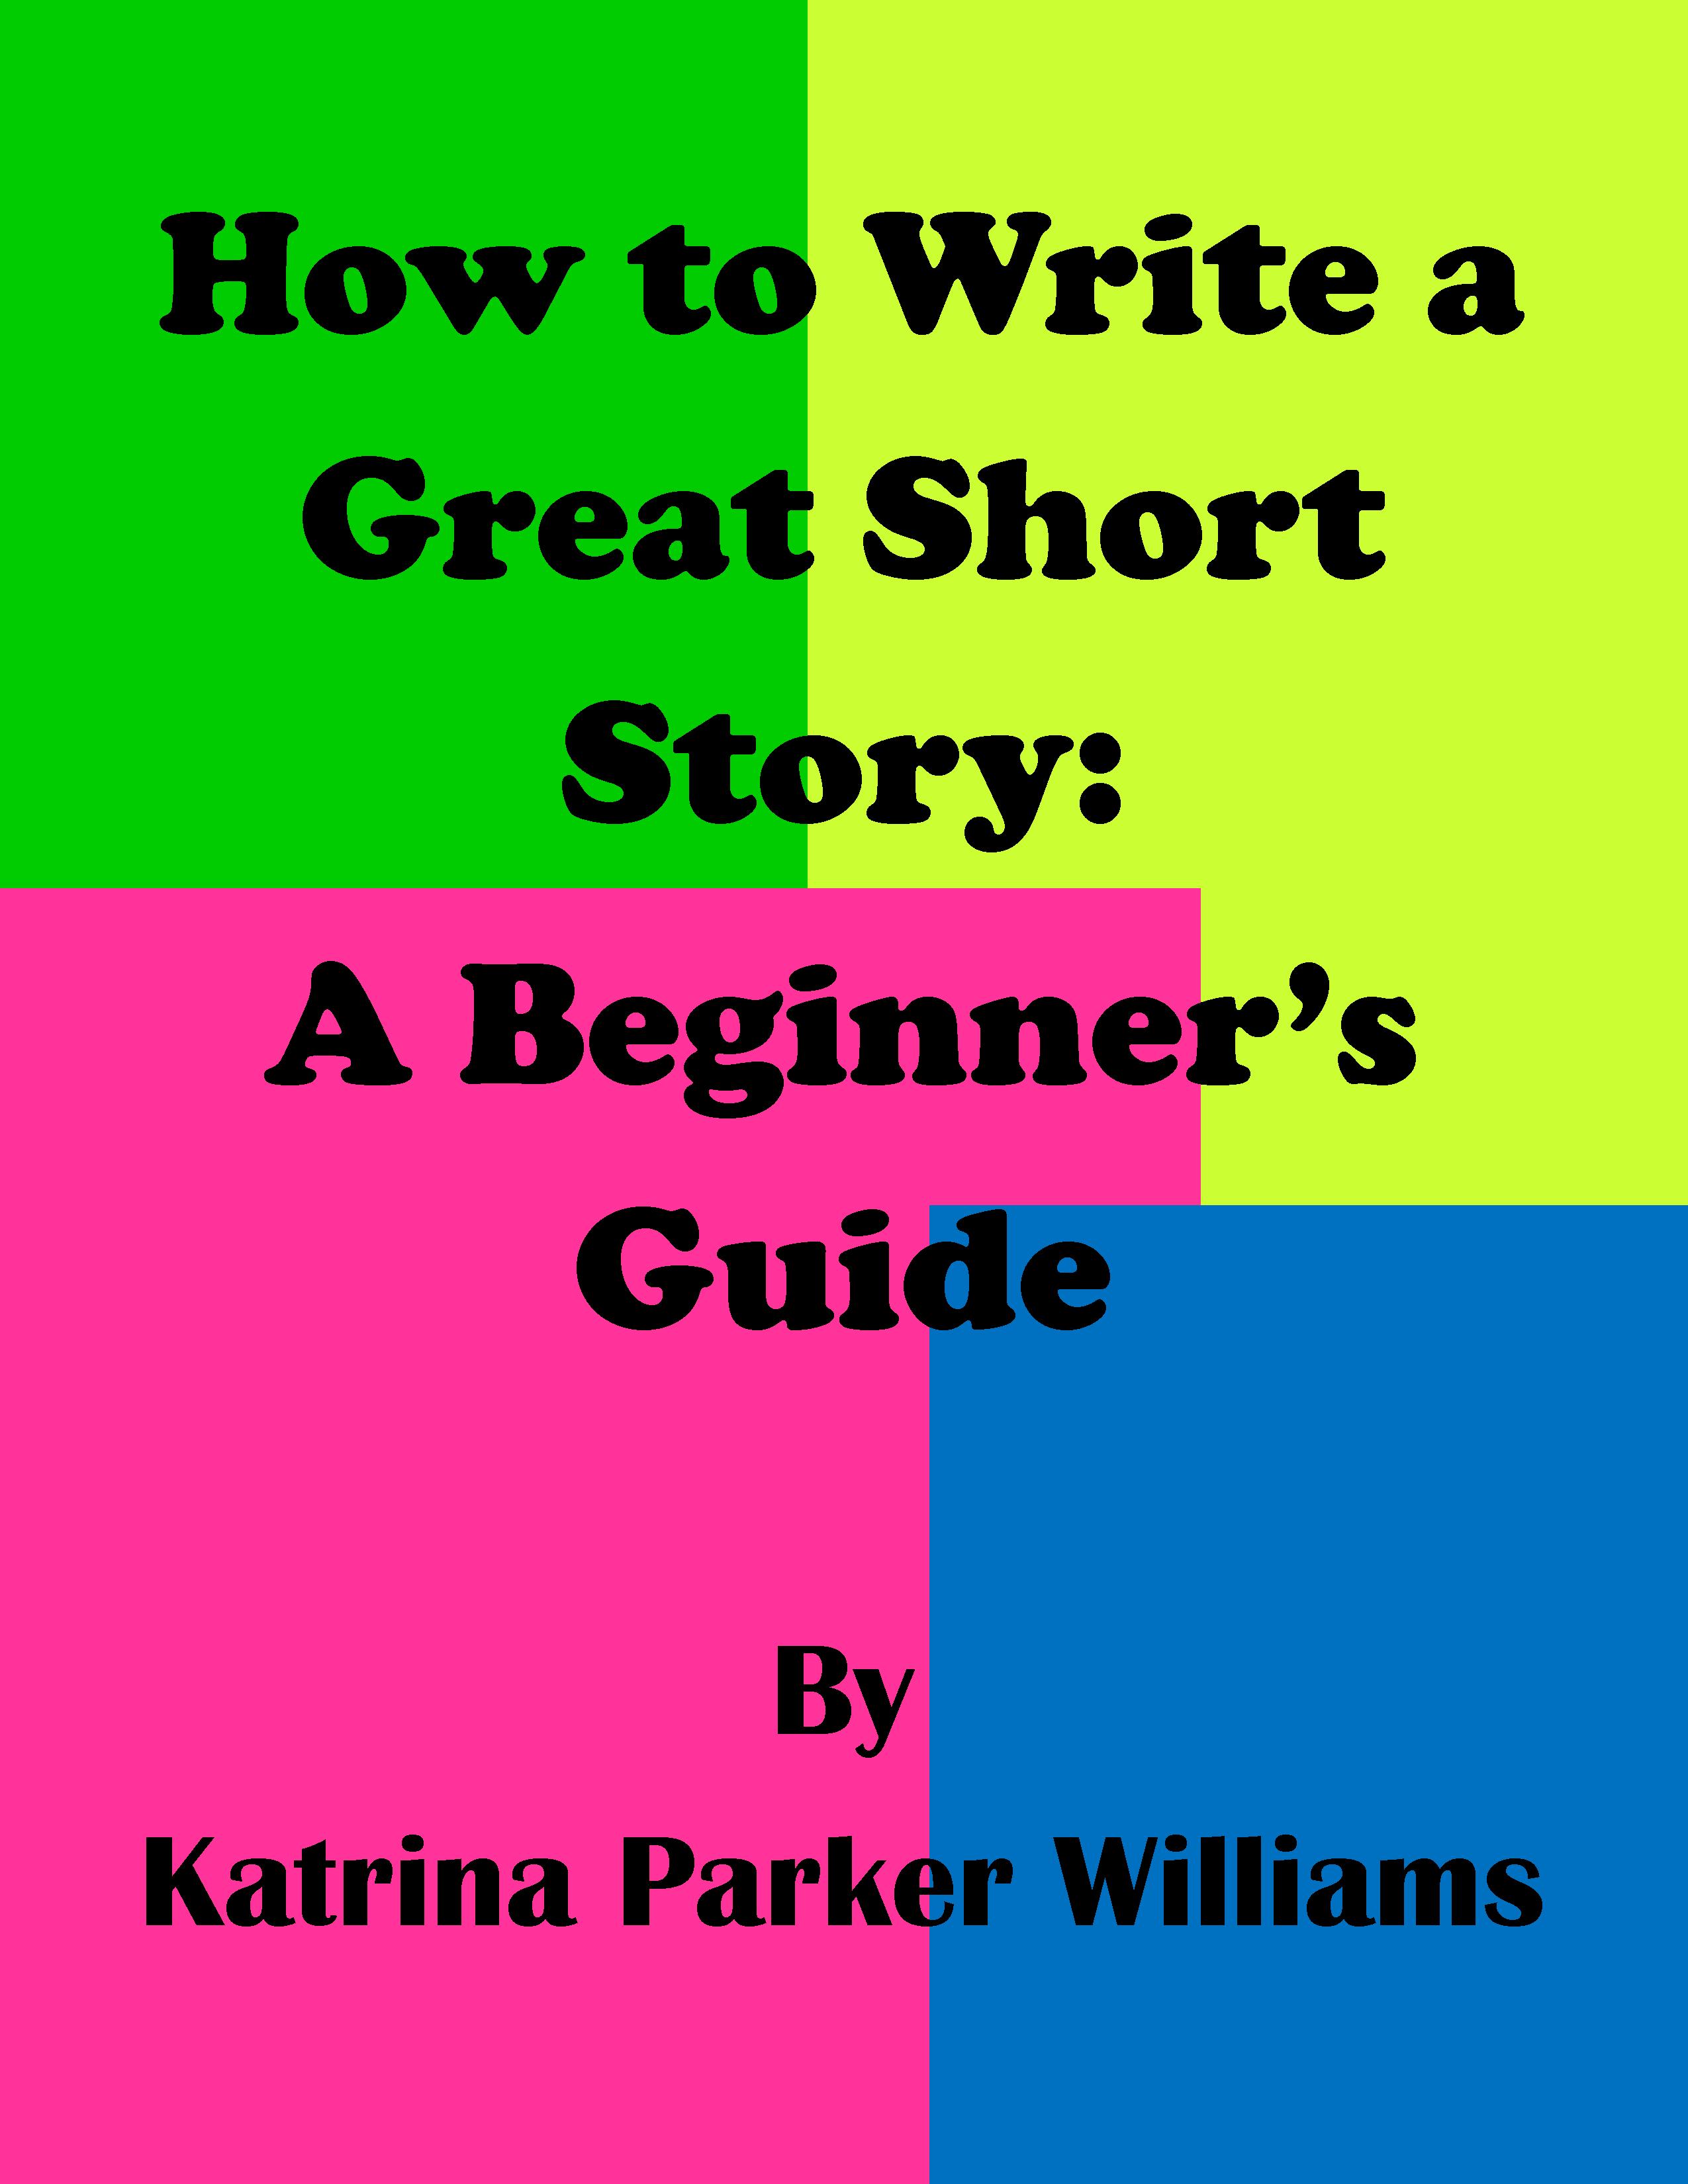 What Do I Do When Using a Title of a Short Story in an Essay?